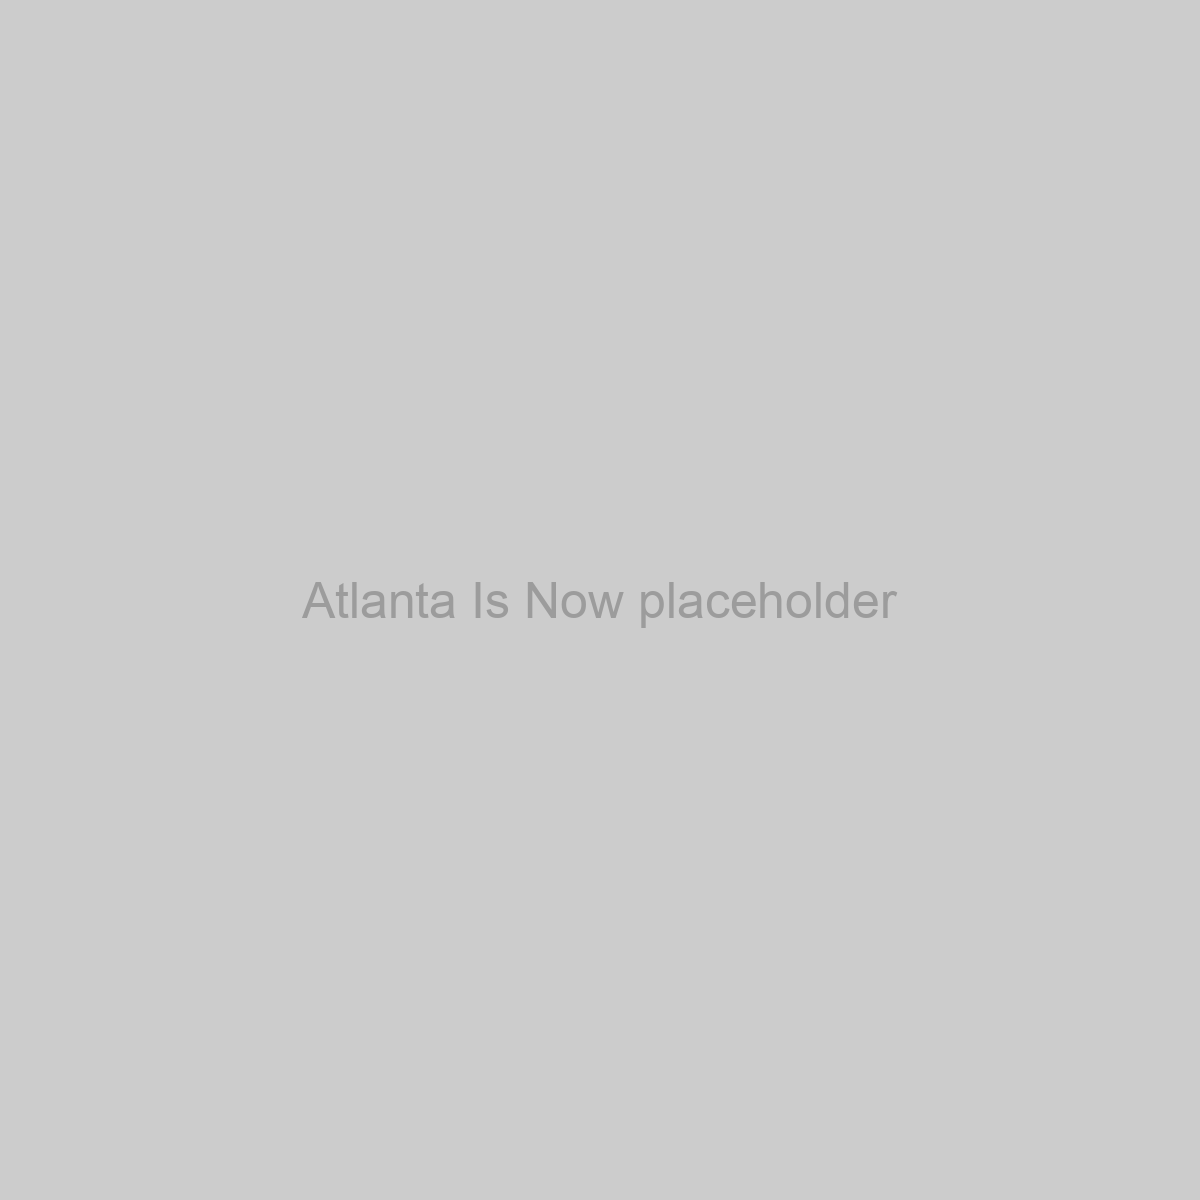 Atlanta Is Now Placeholder Image